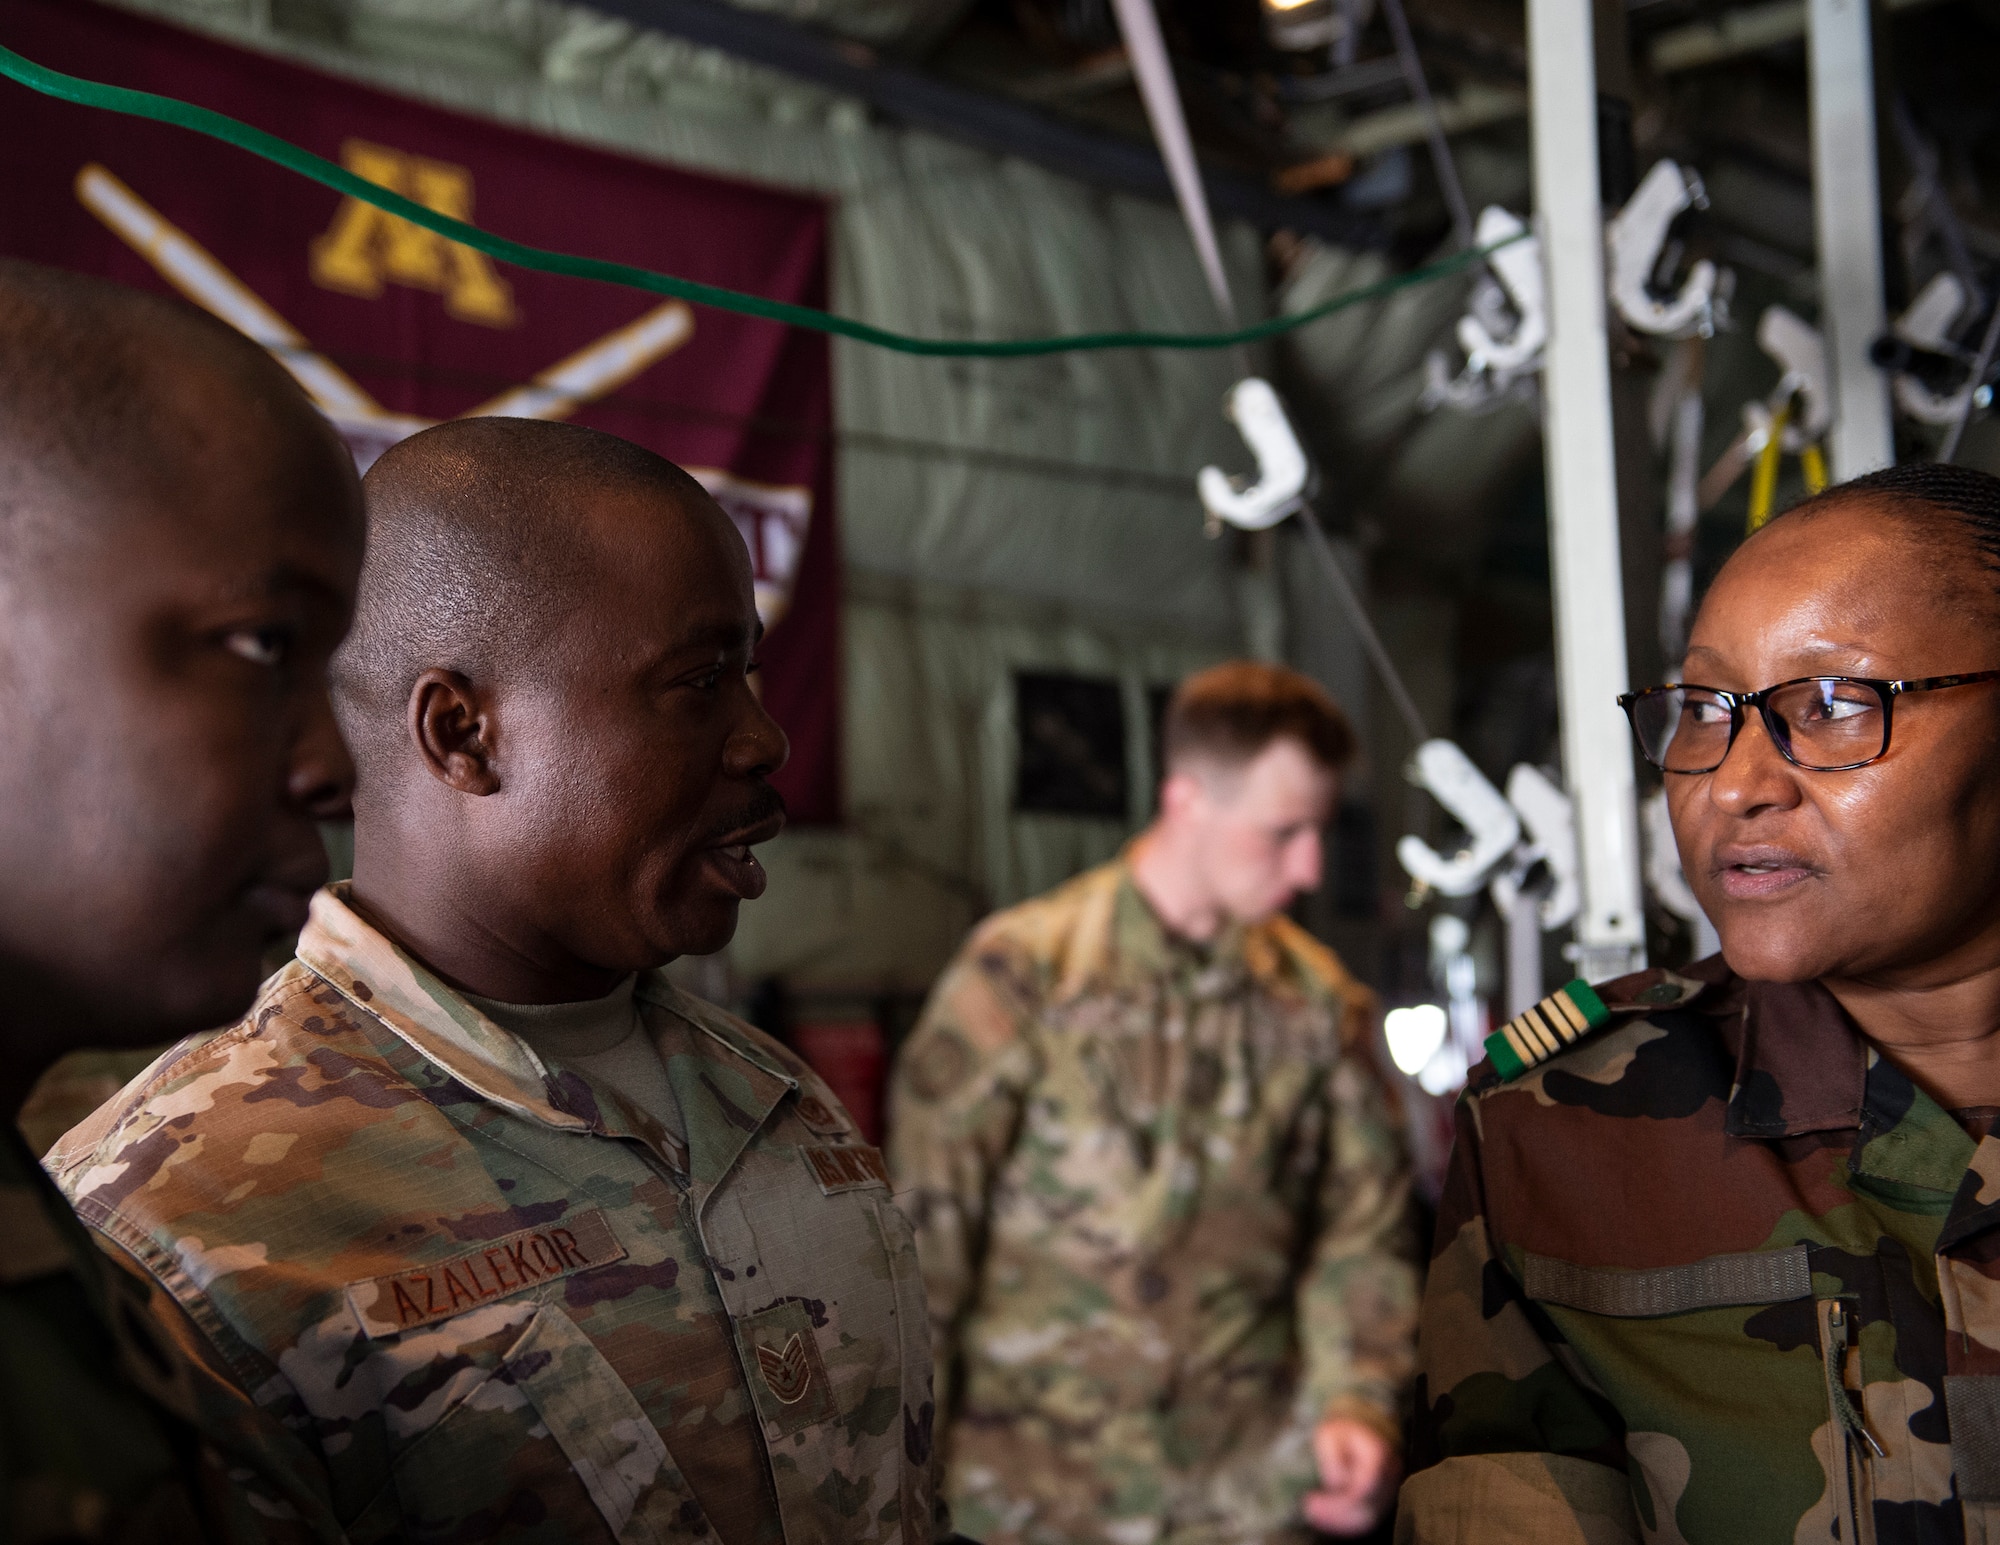 U.S. Air Force Tech. Sgt. Kokou Azalekor, 133rd Civil Engineer Squadron, provides translation for the Nigerien armed forces’ medical leadership in St. Paul, Minn., July 26, 2022.